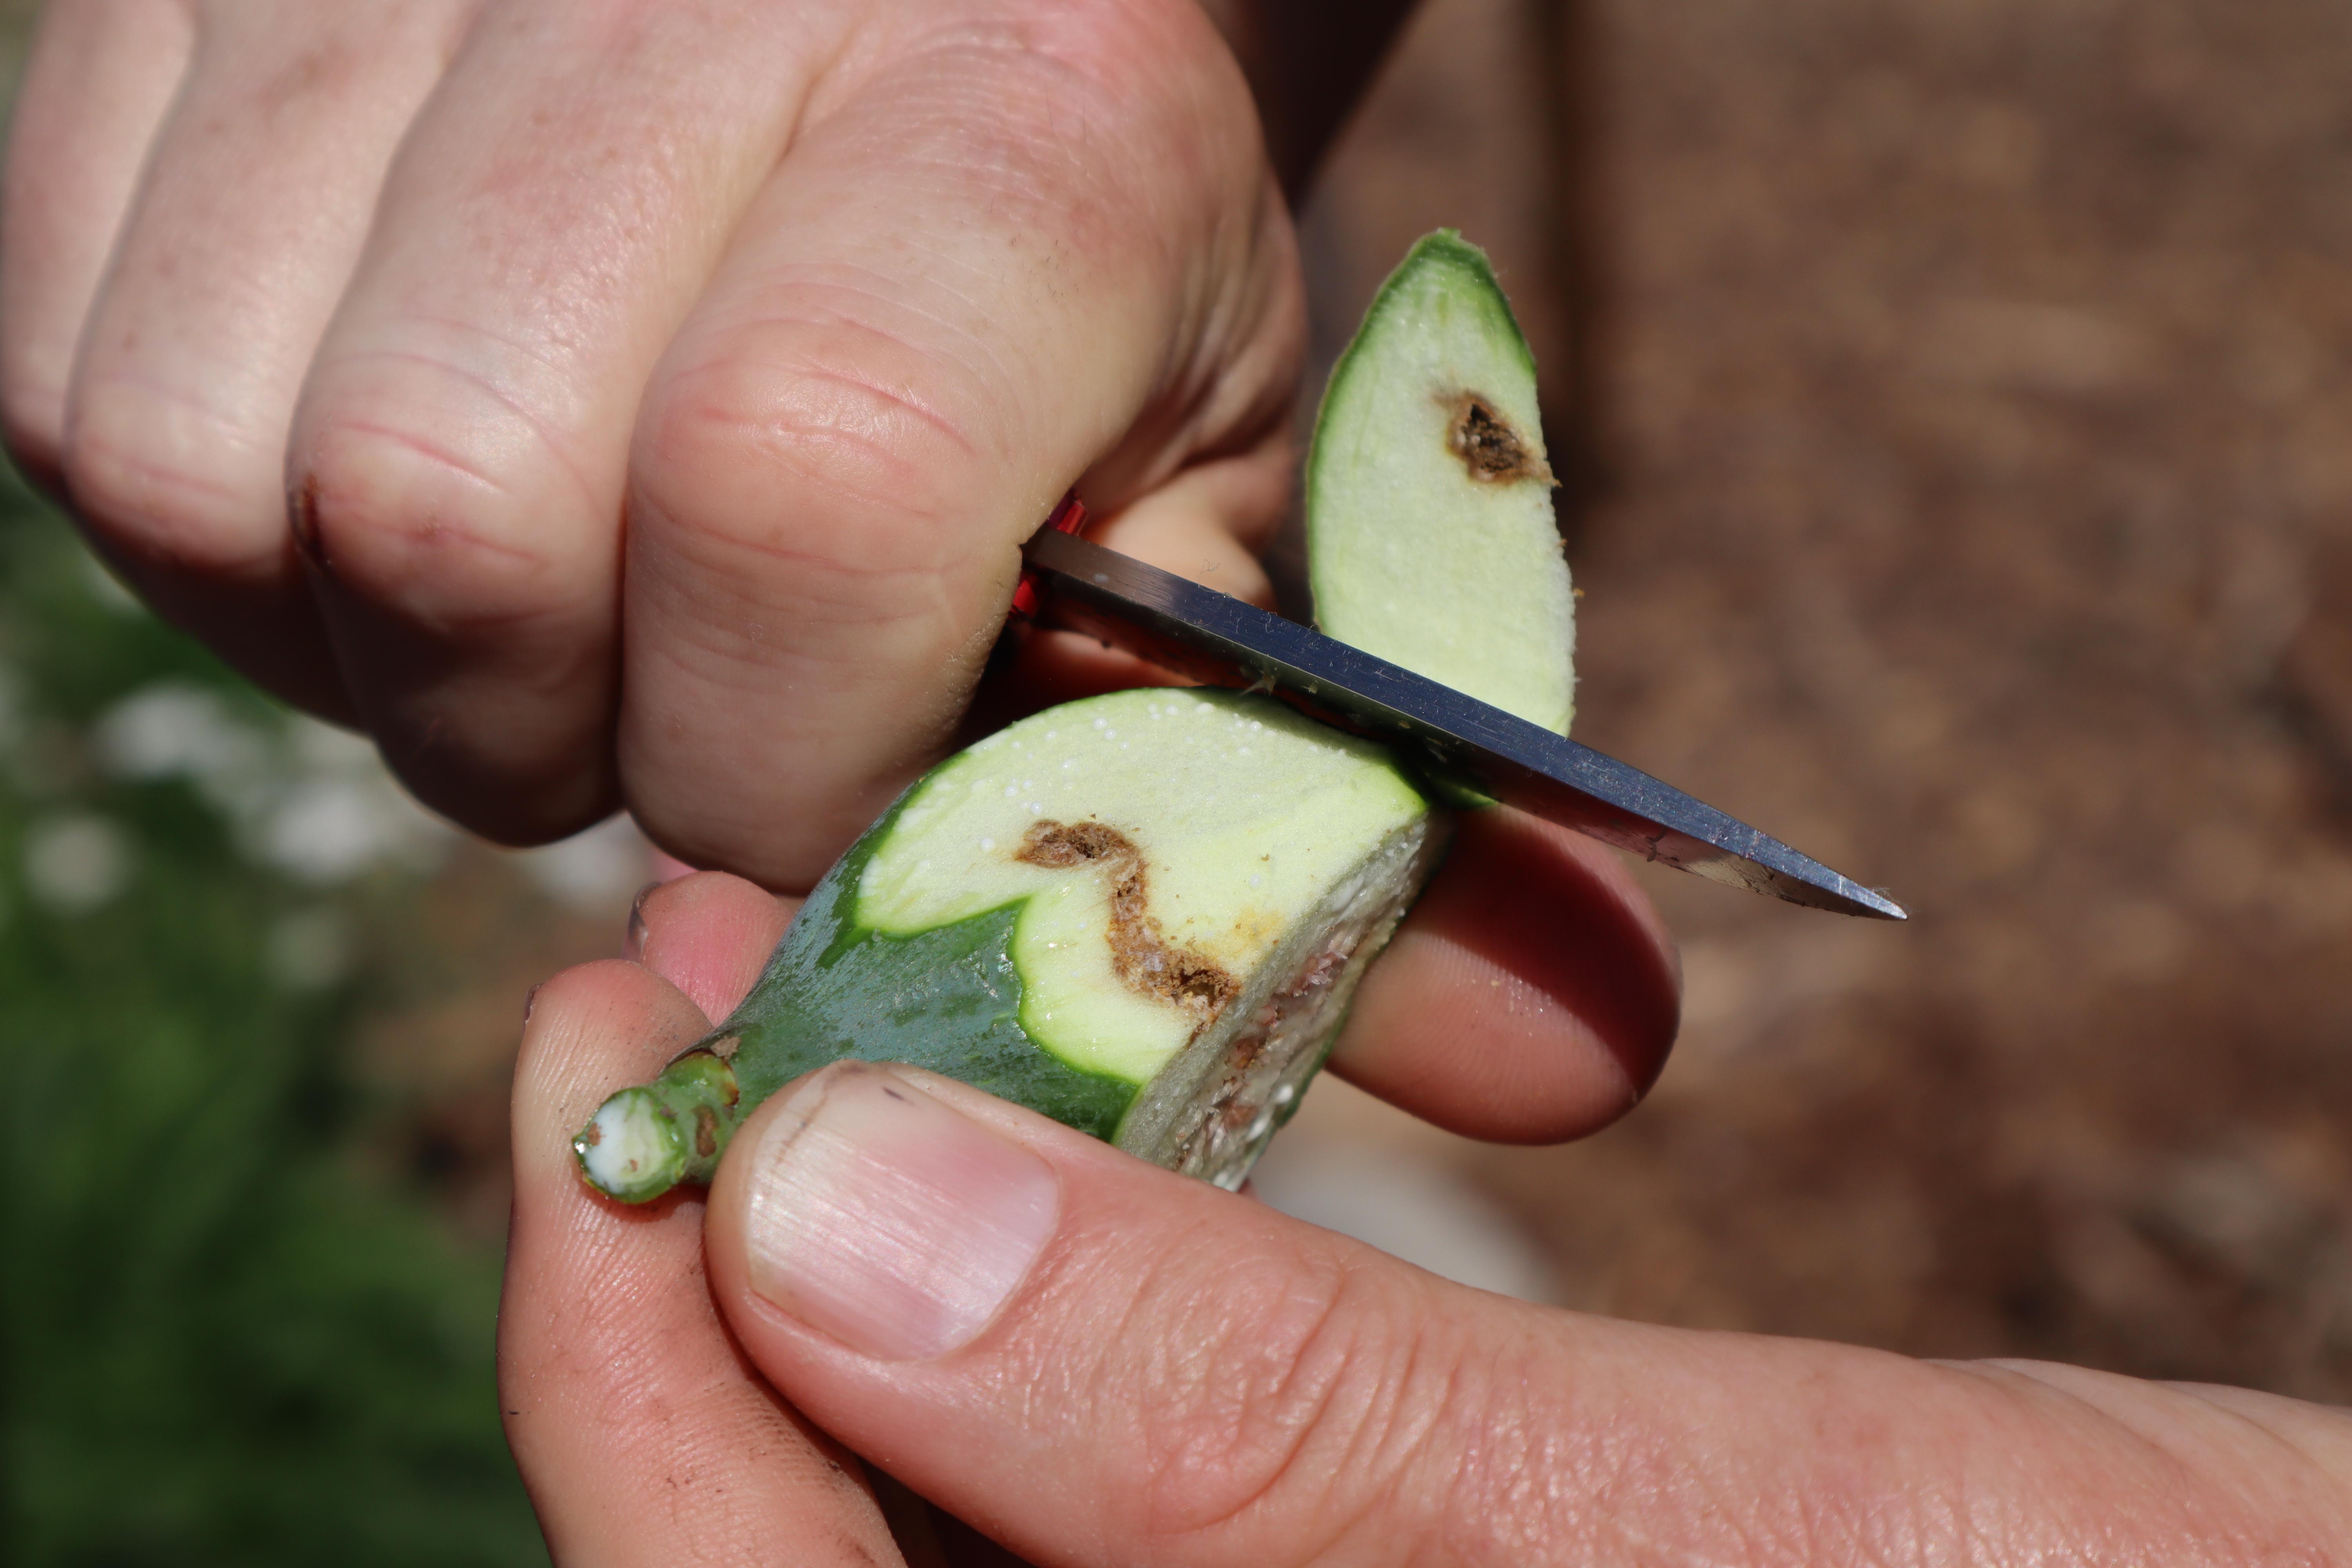 Damage to fig from black fig fly larva (Photo: H. Wilson)